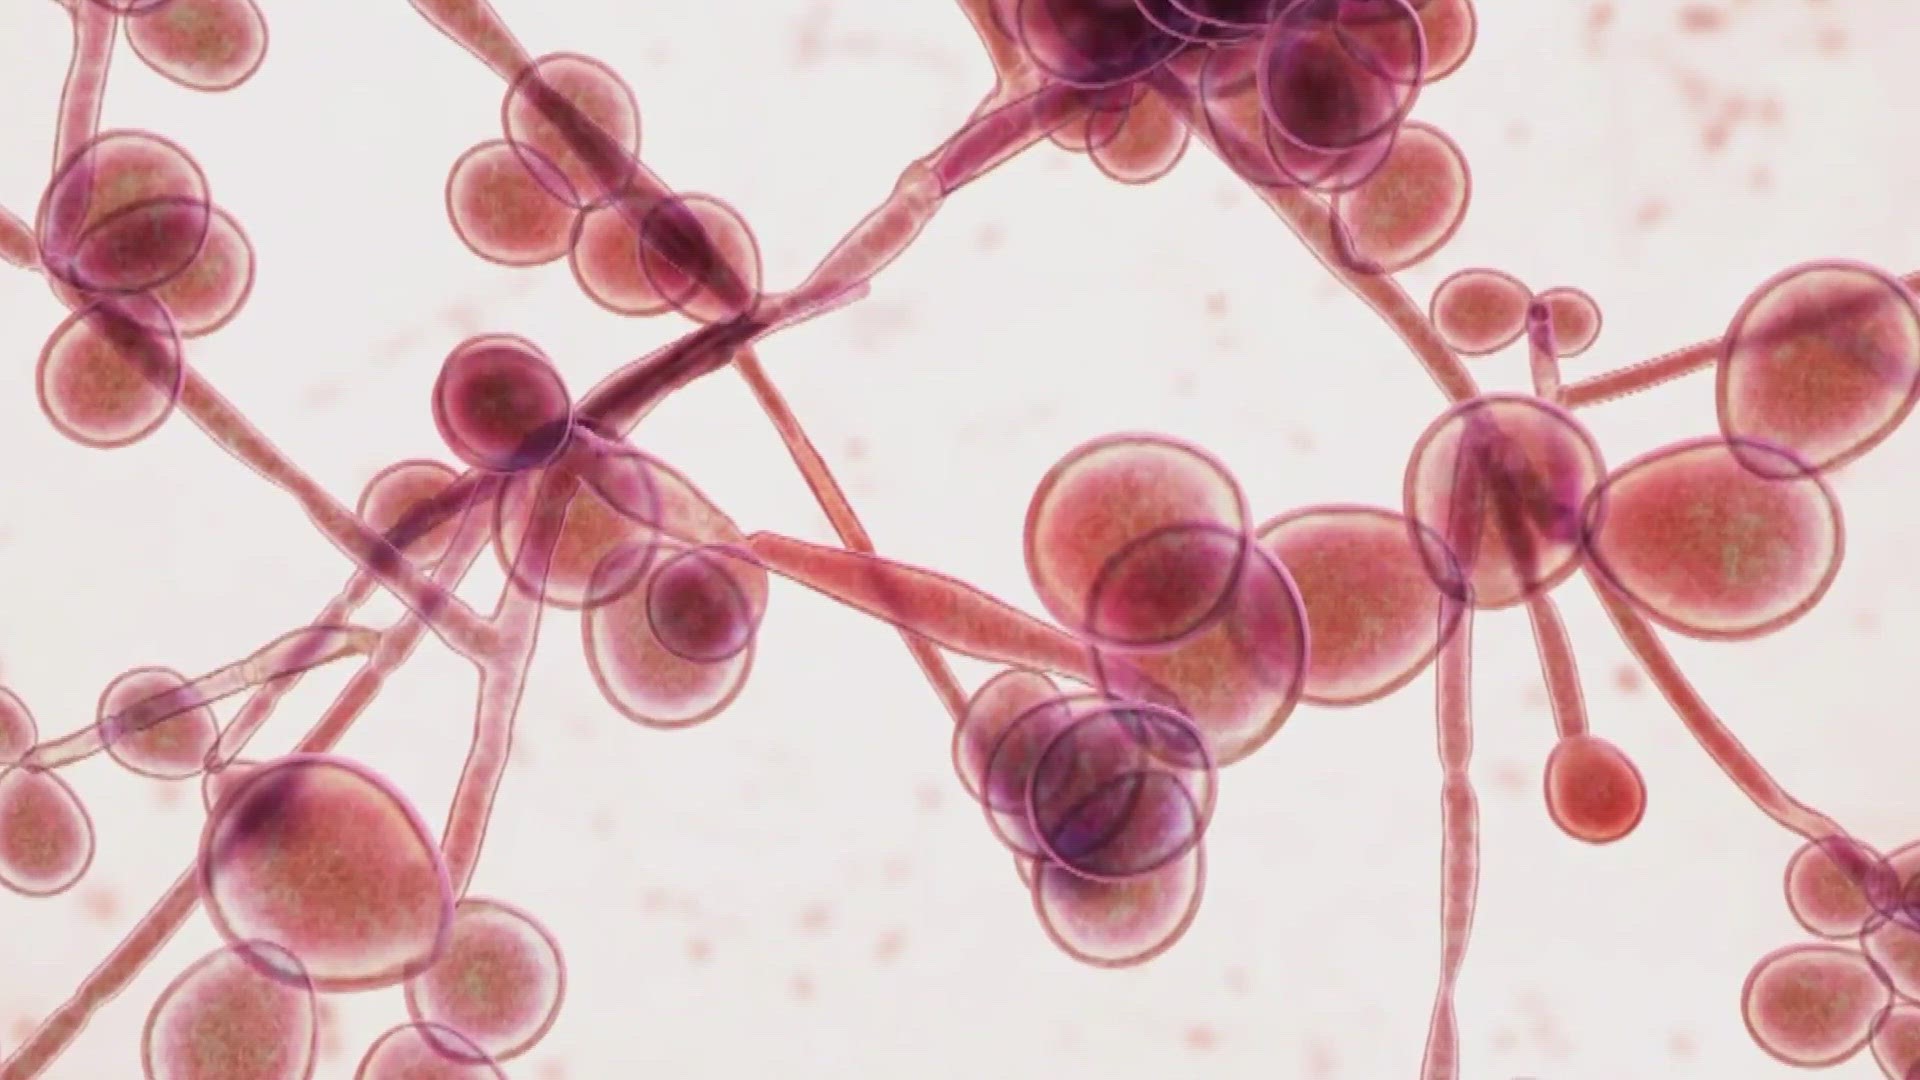 In a new report, the CDC says Candida auris spread at a concerning rate in healthcare facilities across the country from 2021–2022.